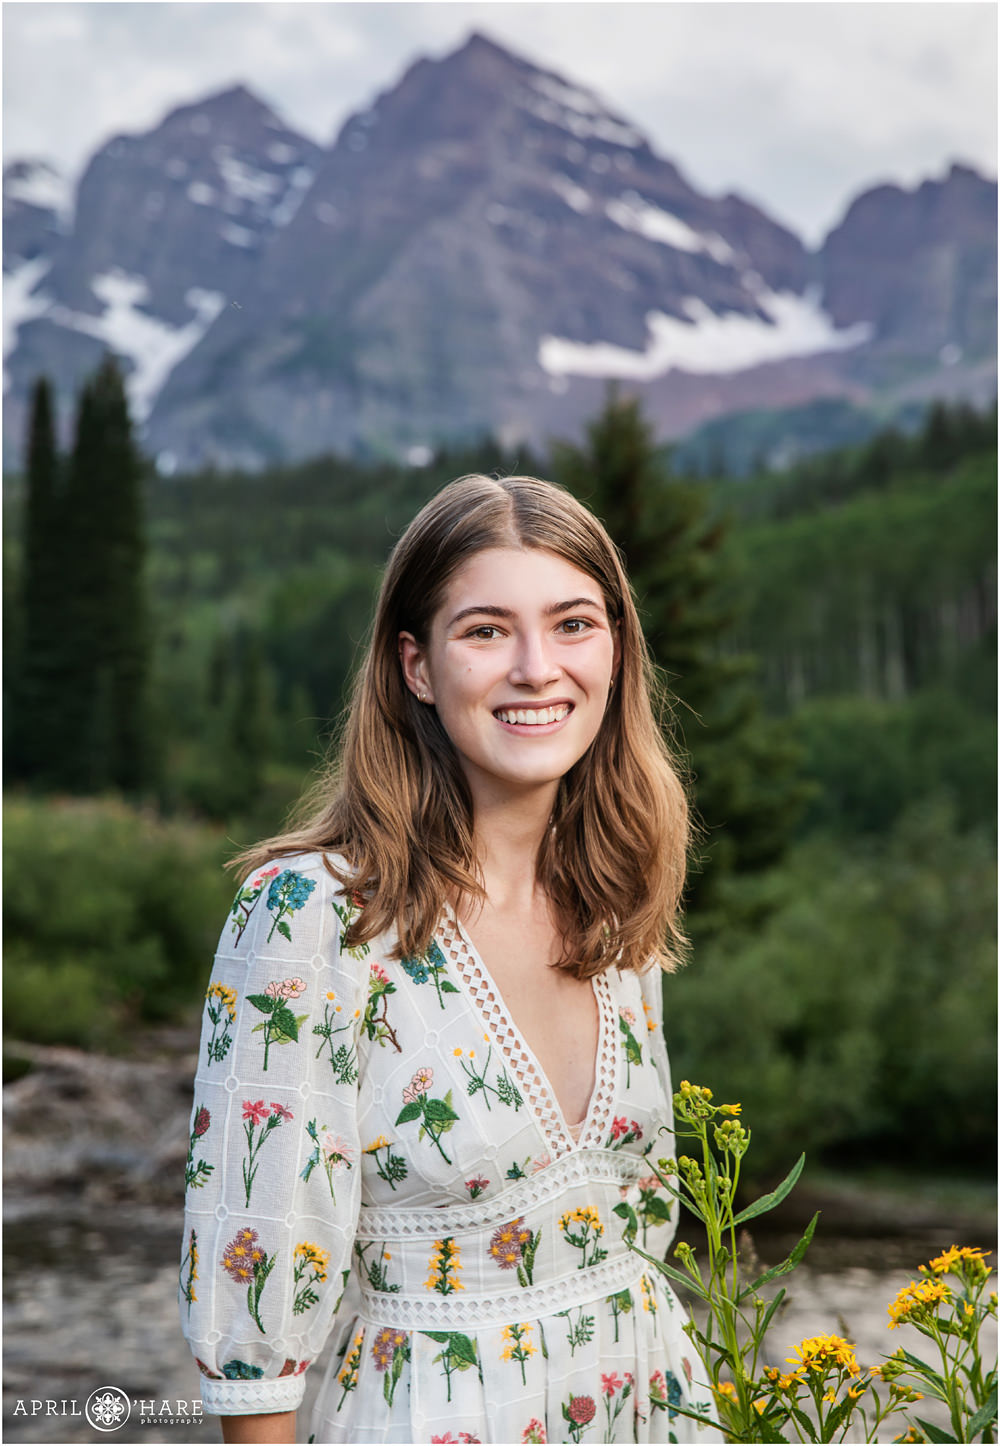 A young woman wearing a pretty white floral print dress poses for an individual portrait with a mountain backdrop near Snowmass Village Colorado